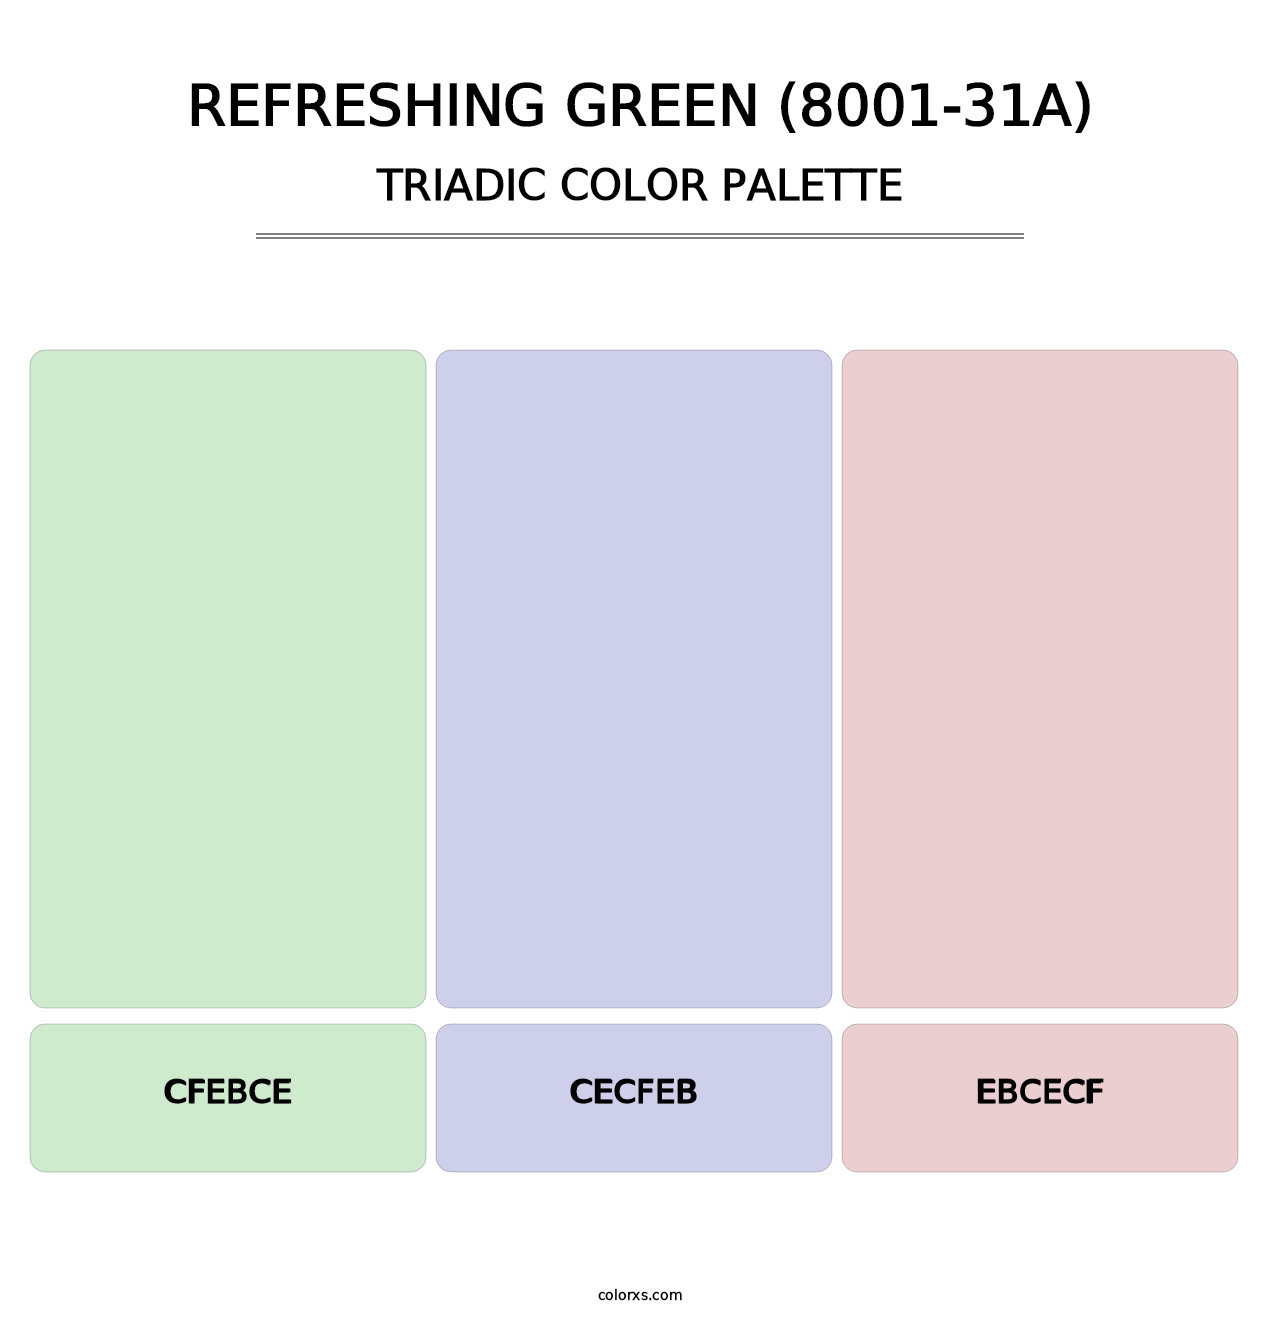 Refreshing Green (8001-31A) - Triadic Color Palette